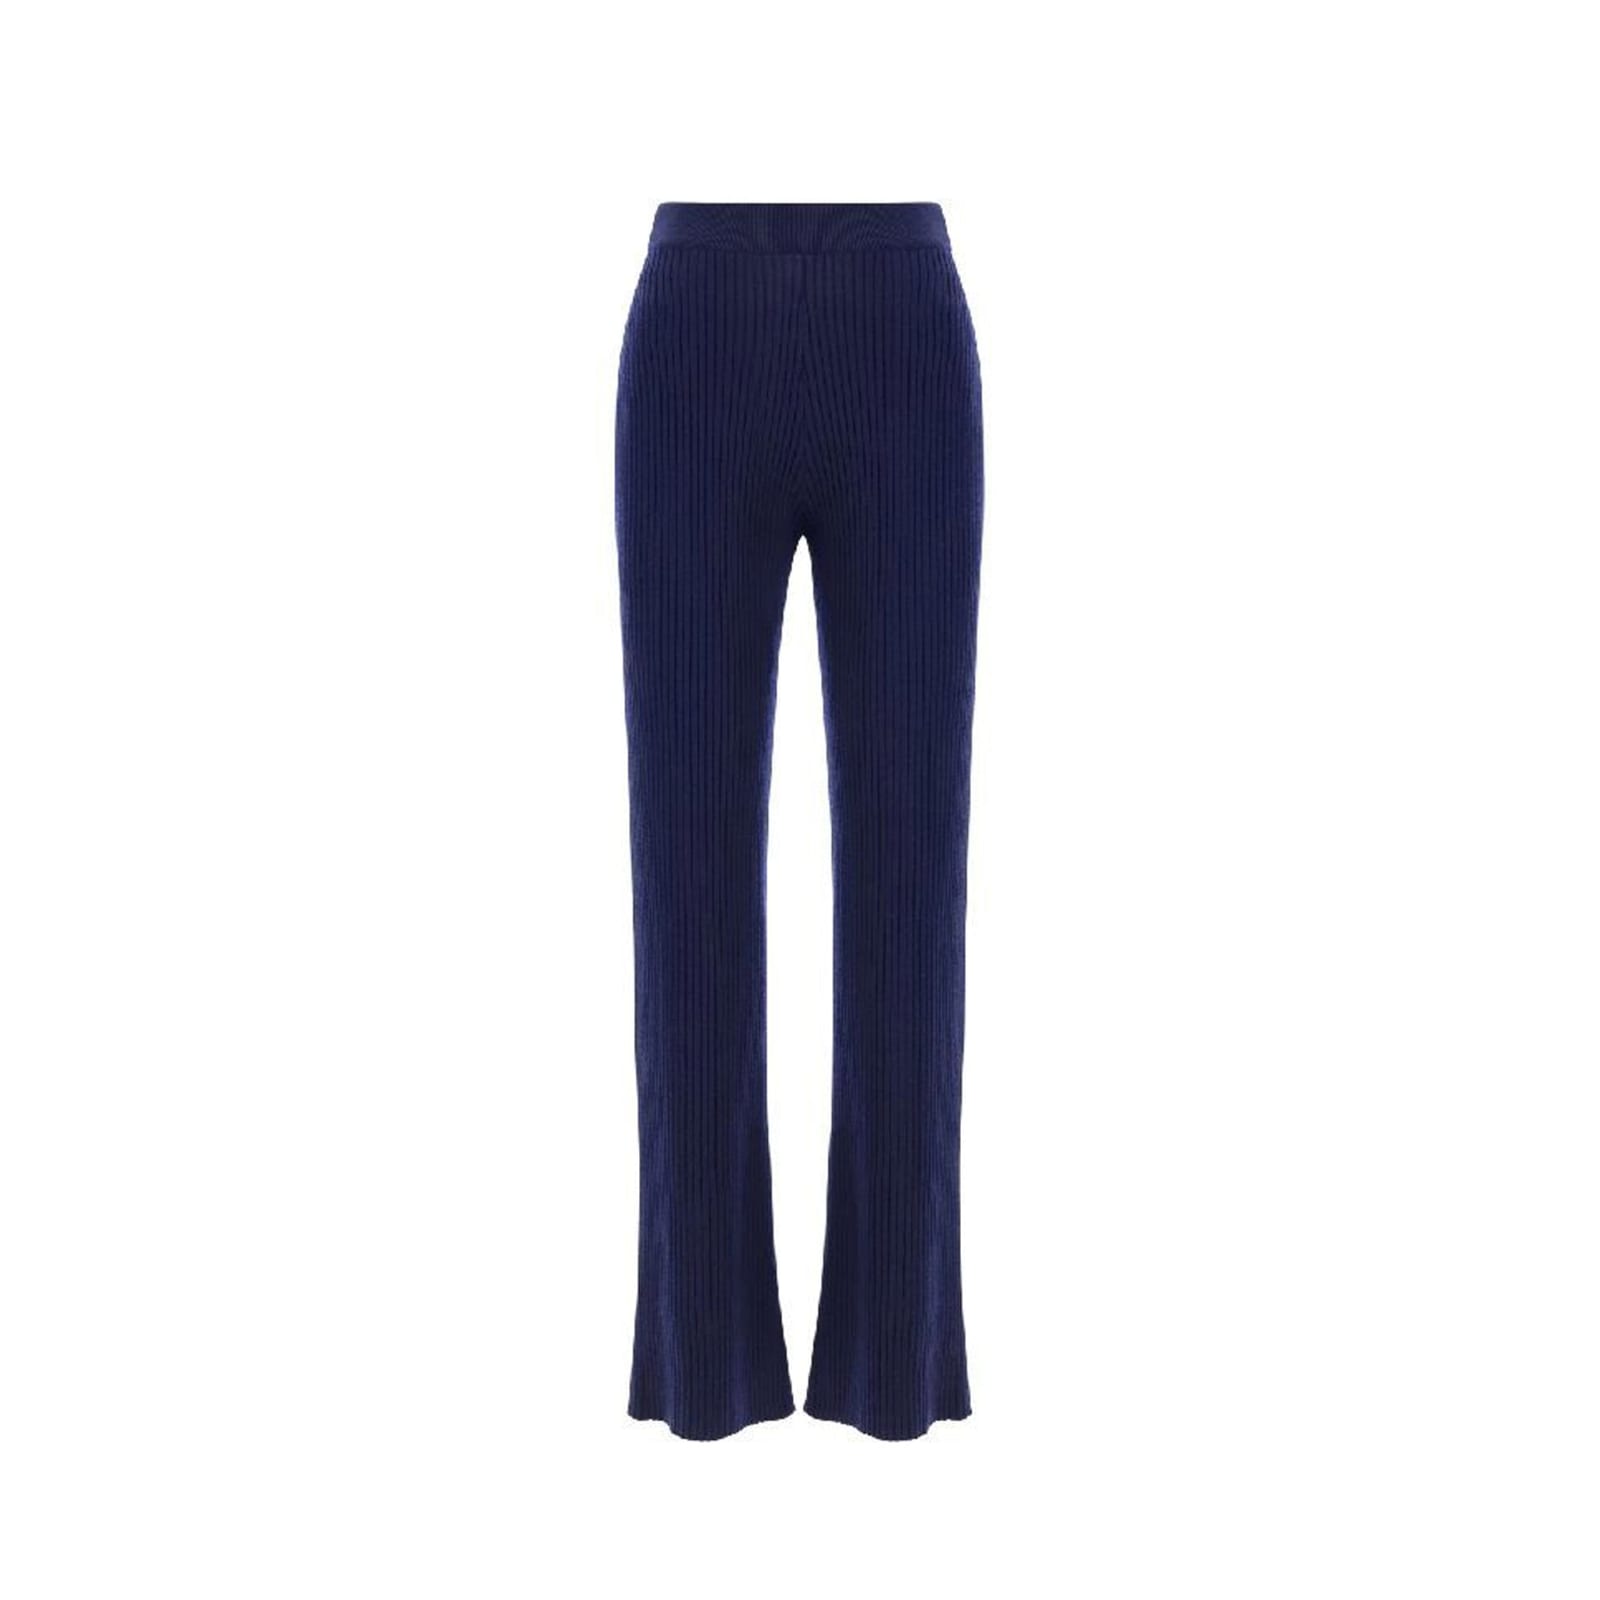 CHLOÉ WOOL AND CASHMERE PANTS